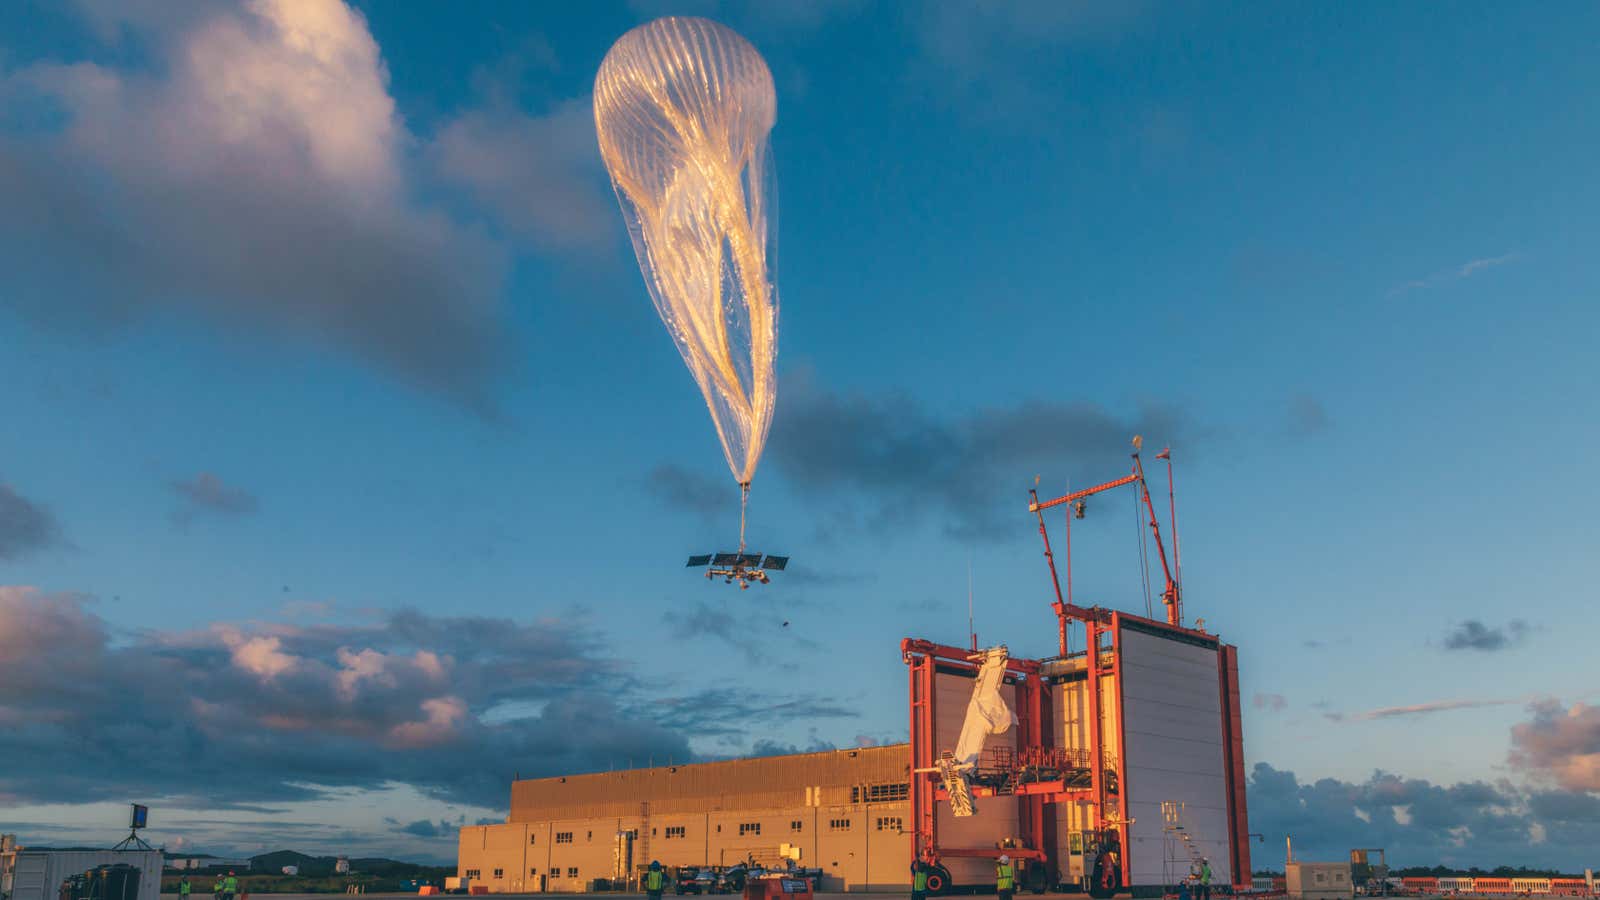 Can balloons connect the most remote regions of Peru?